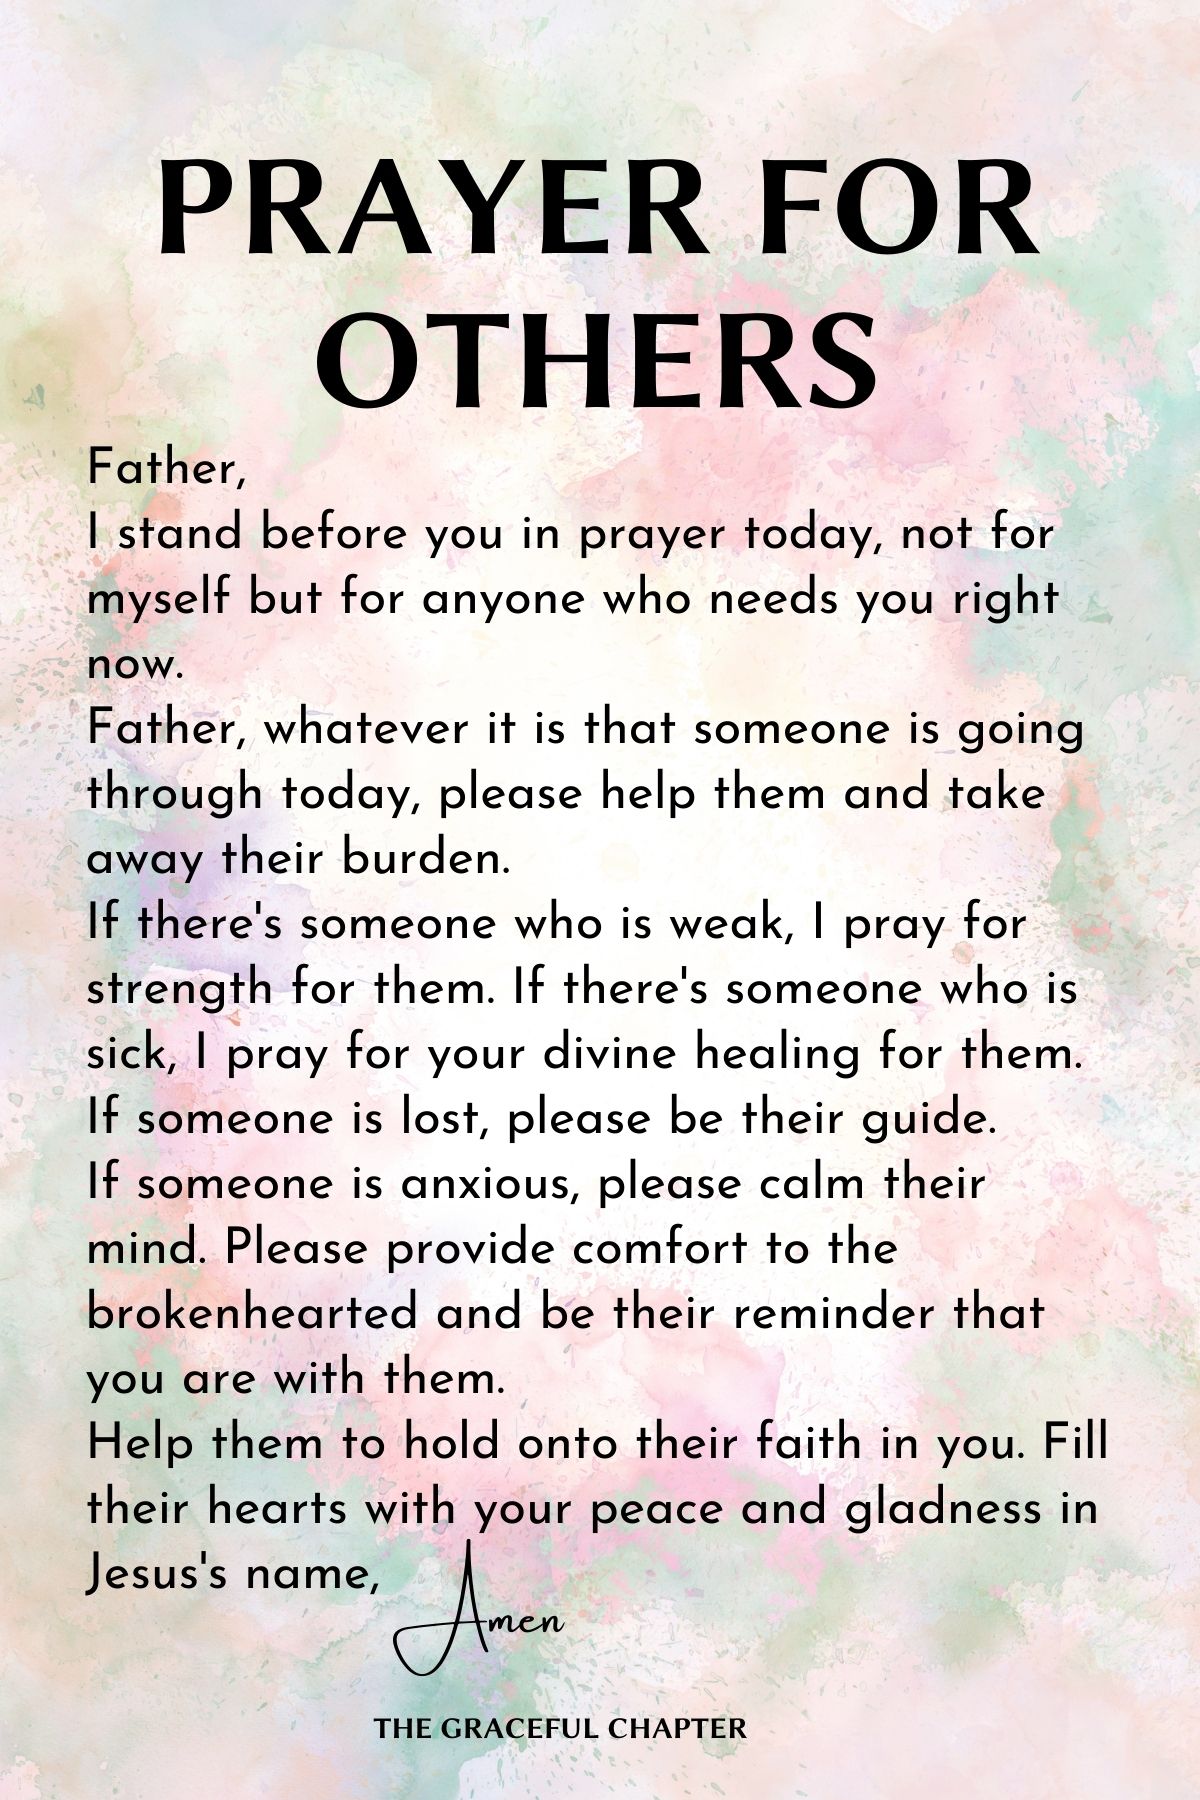 Prayer for others